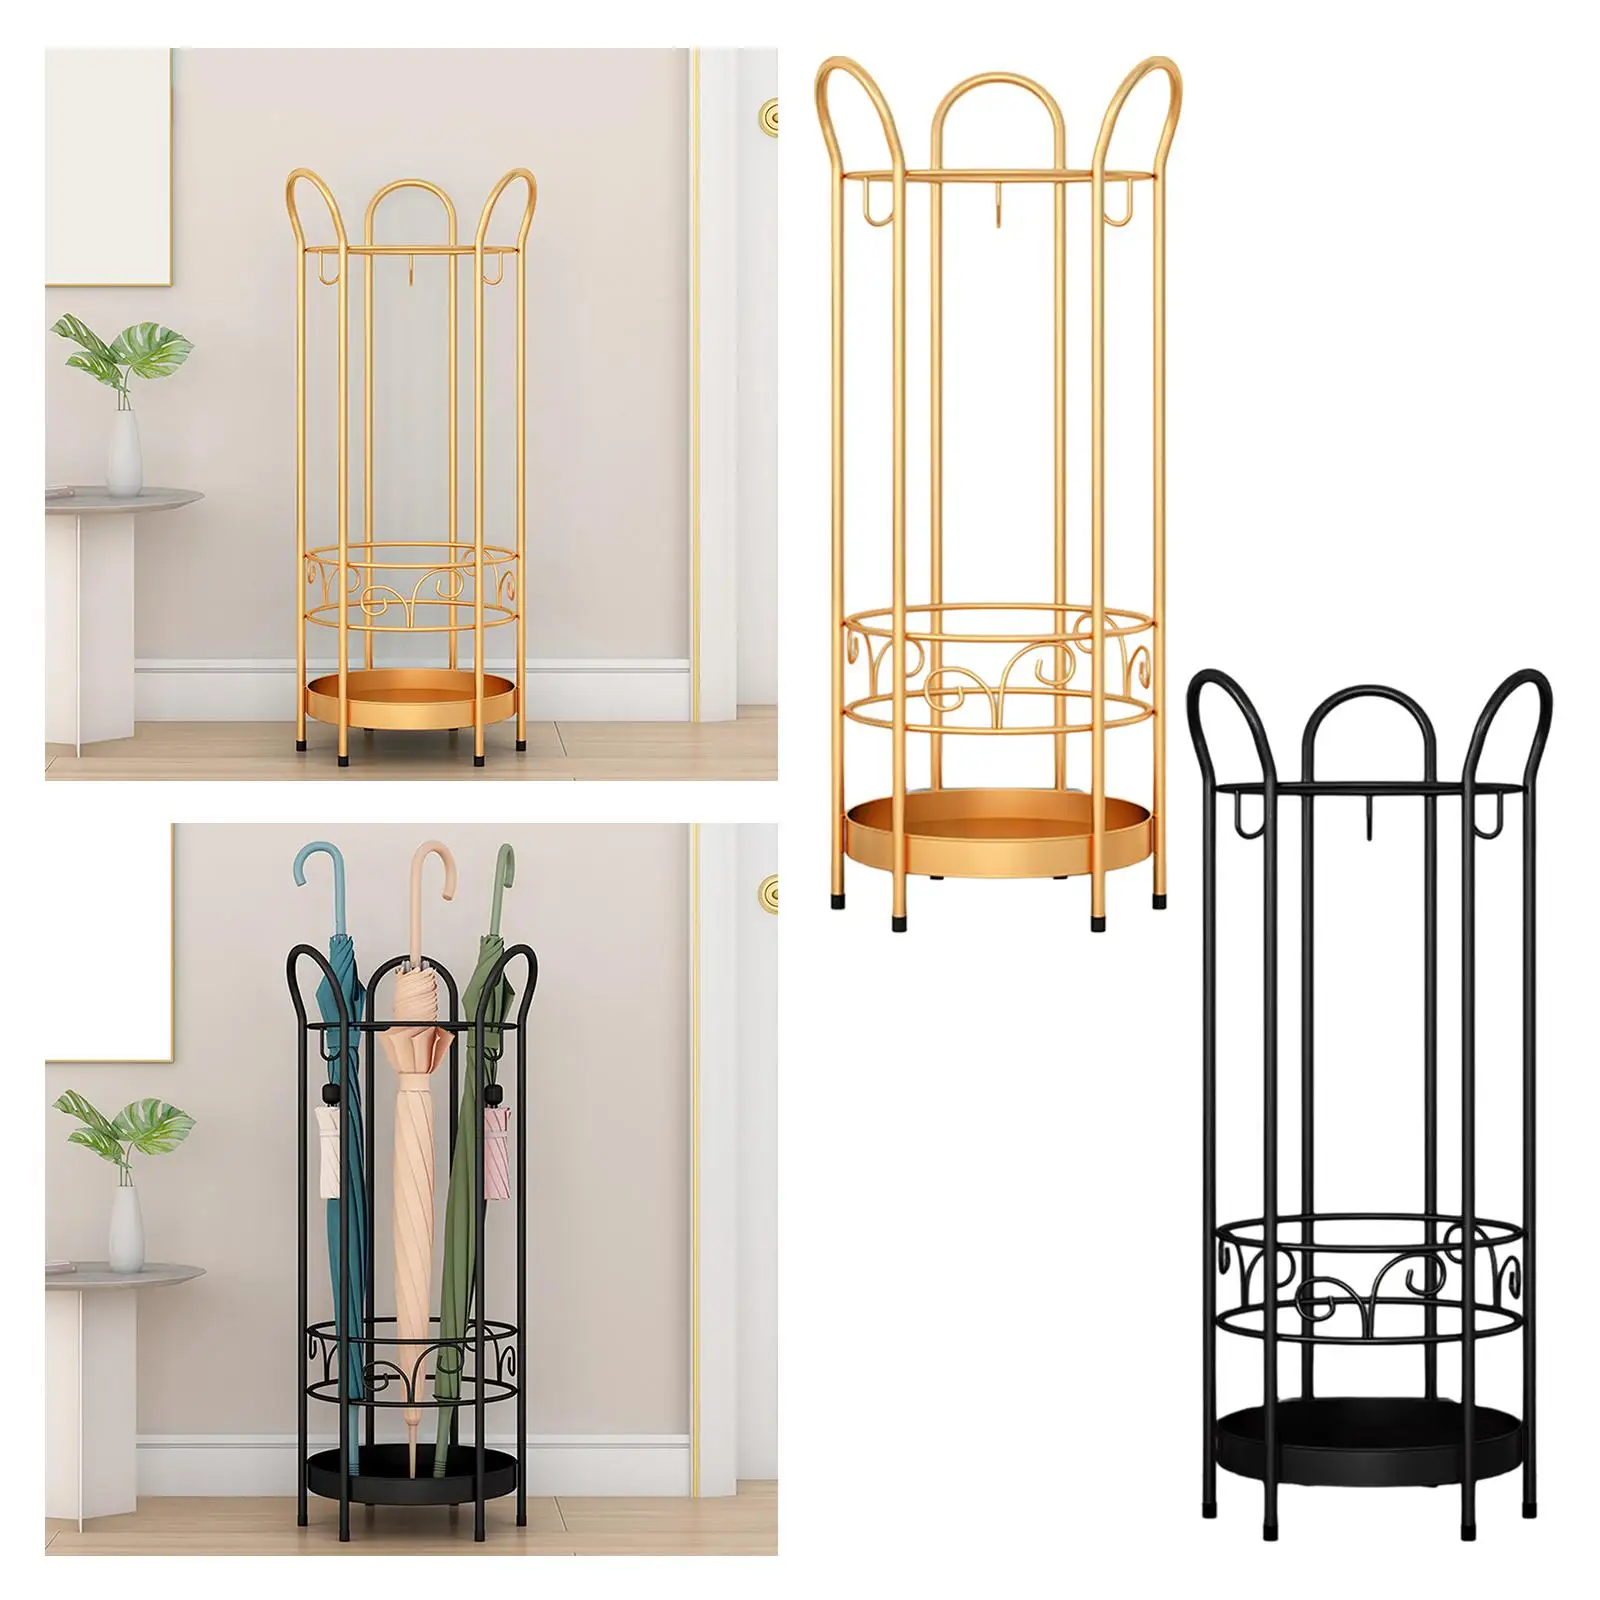 Metal Round Umbrella Stand Rack with 3 Hooks 25x60cm Standing Umbrella Holder for Entry Bars Home Office Housewarming Gifts